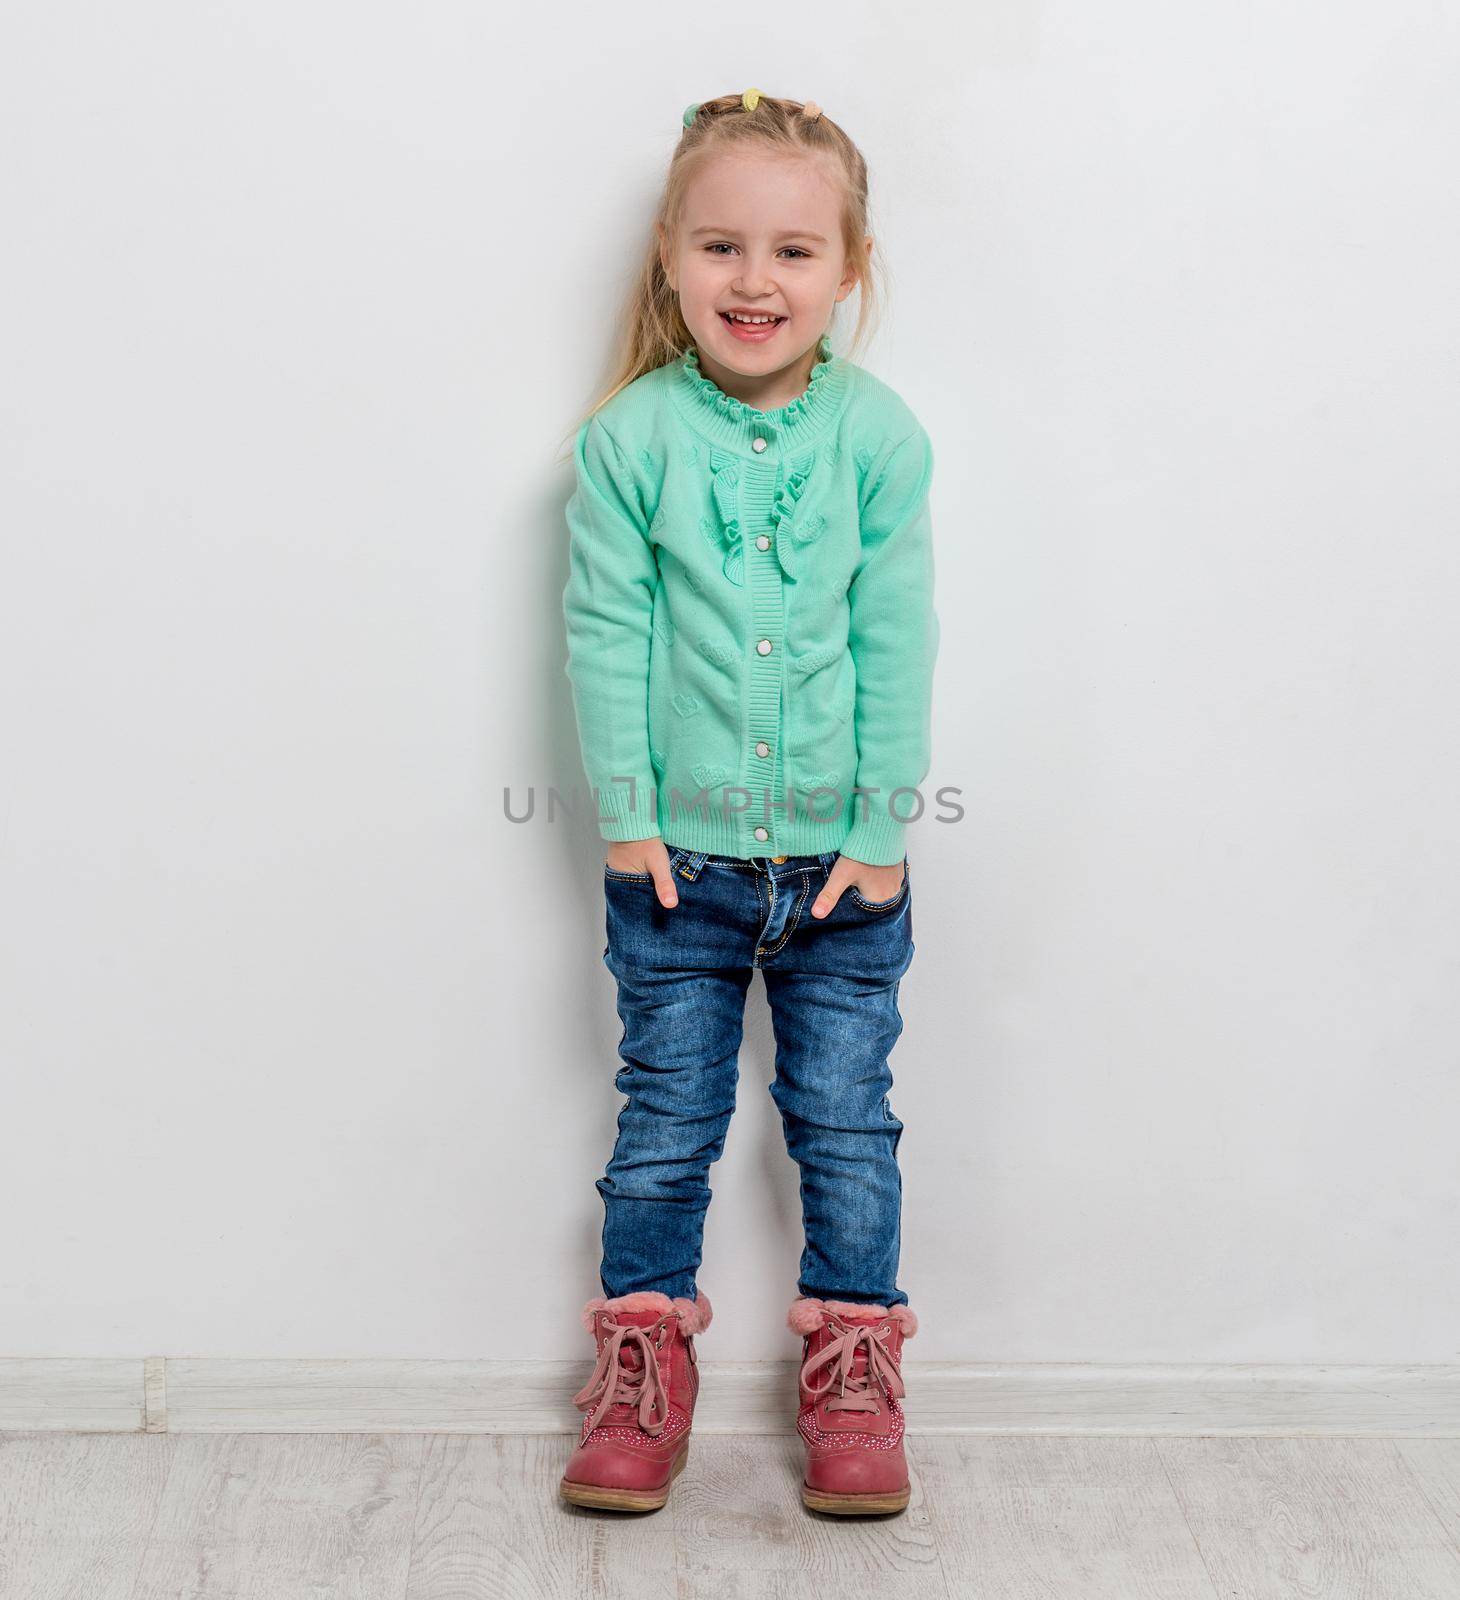 beautiful cheerful little girl with her hands in pockets of jeans